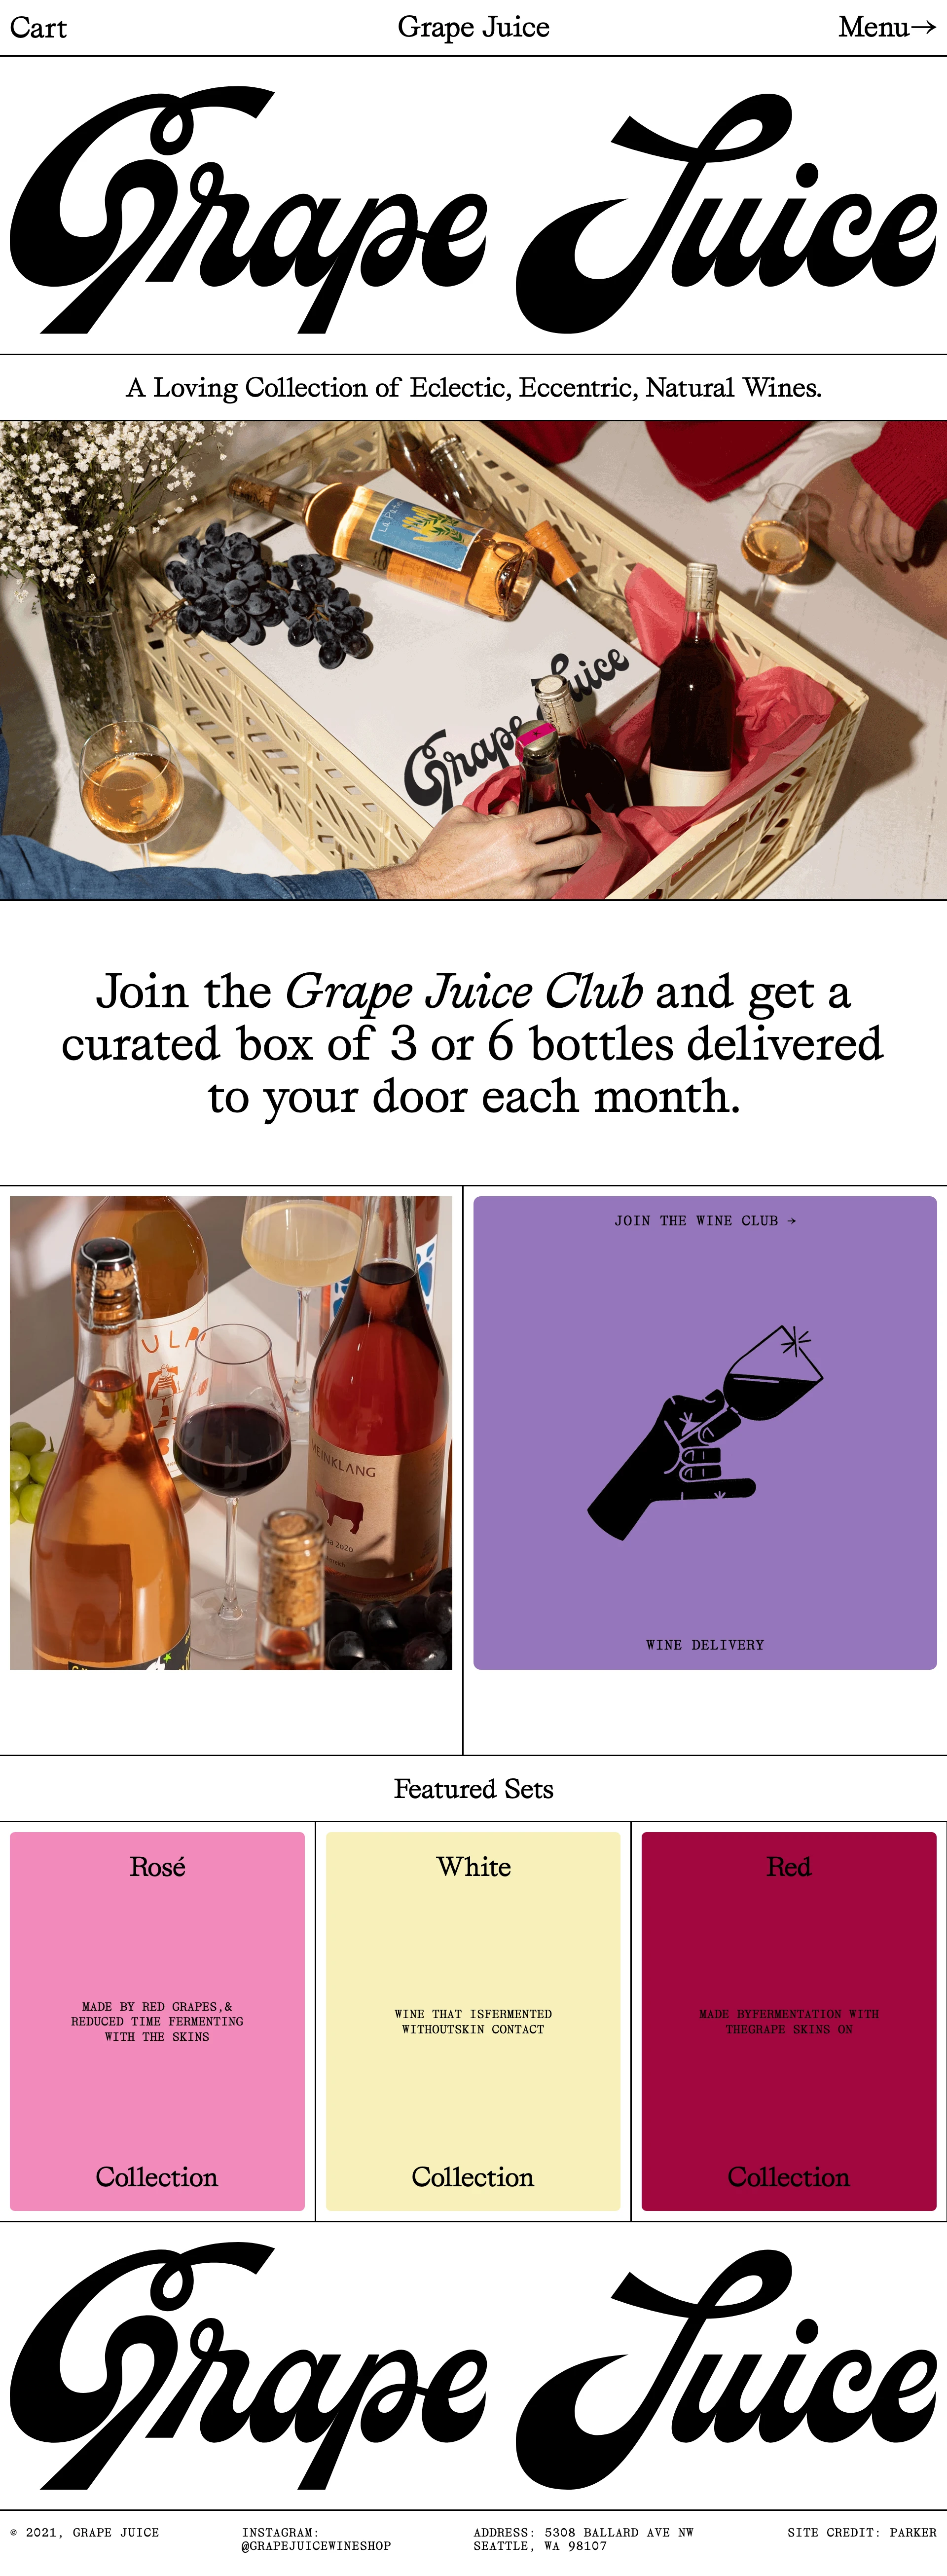 Grape Juice Landing Page Example: A Loving Collection of Eclectic, Eccentric, Natural Wines.